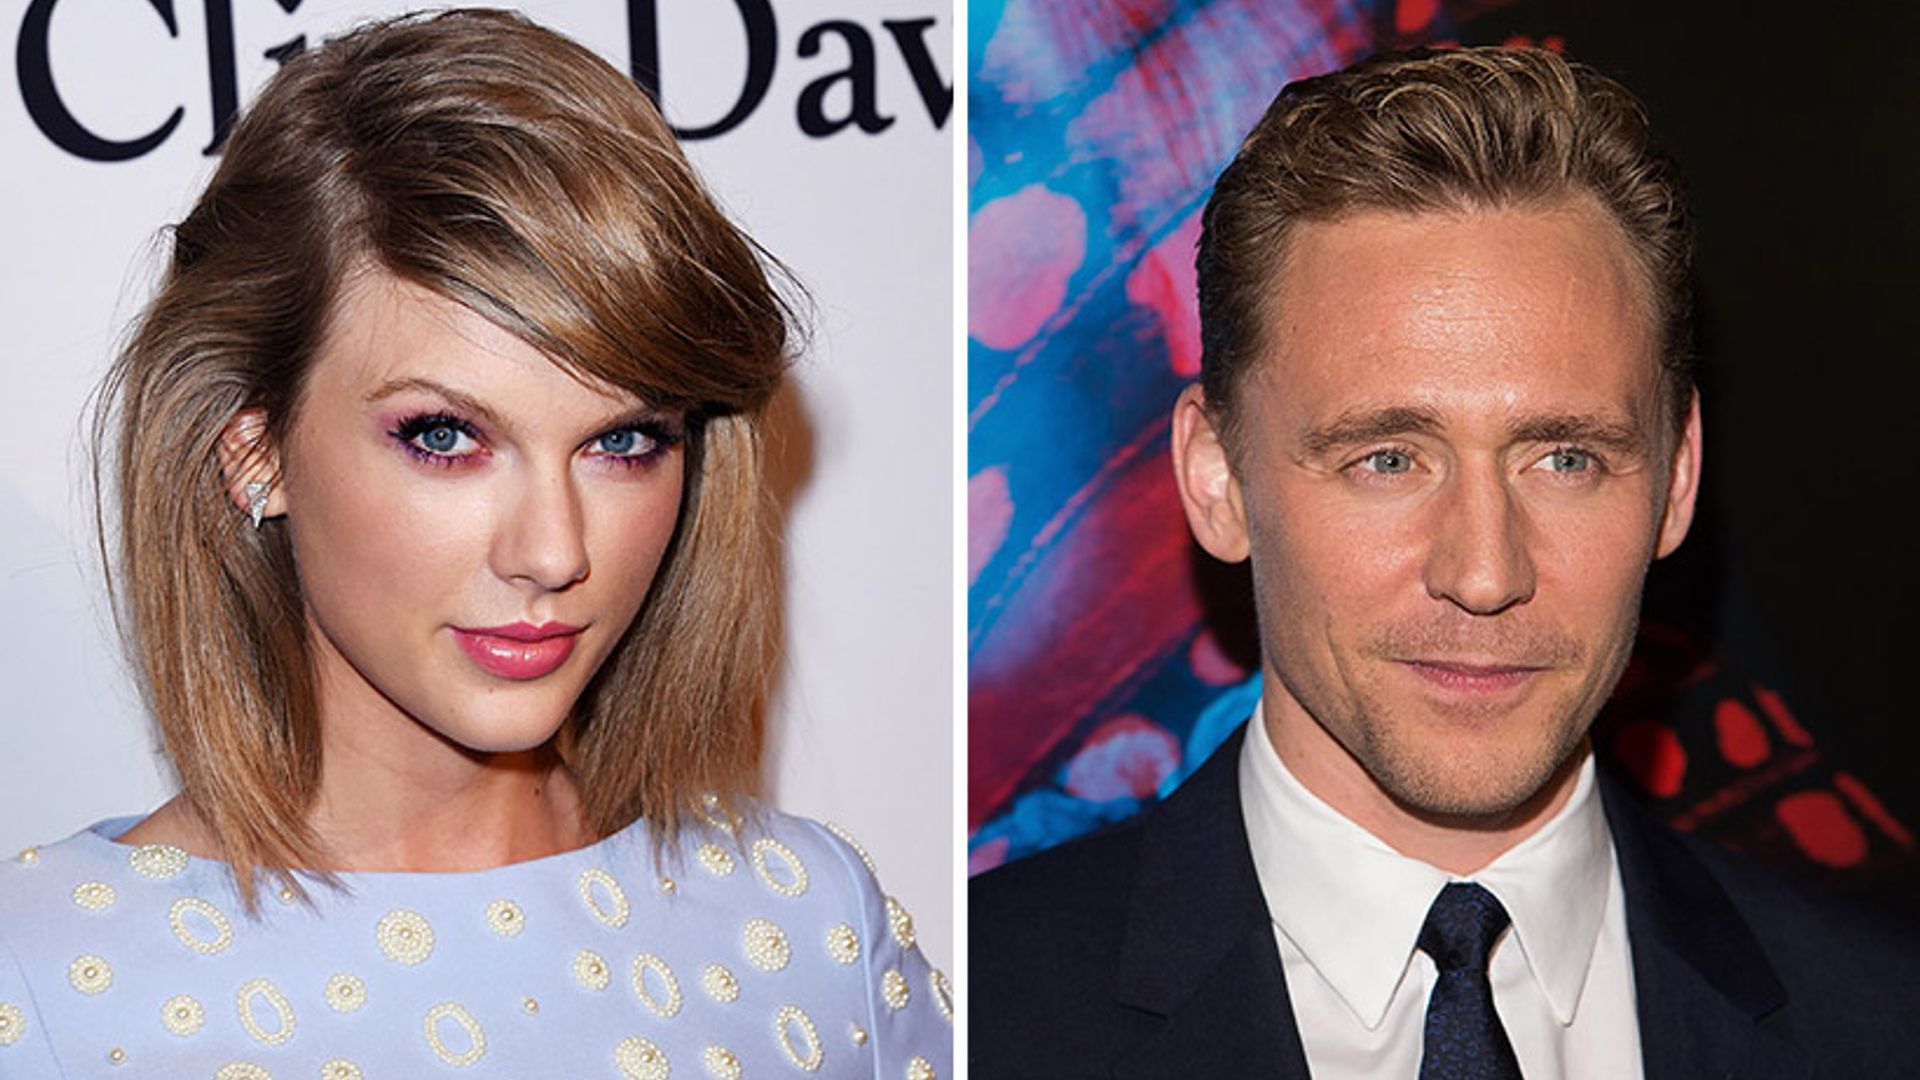 How the internet is reacting to Tom Hiddleston and Taylor Swift's new romance